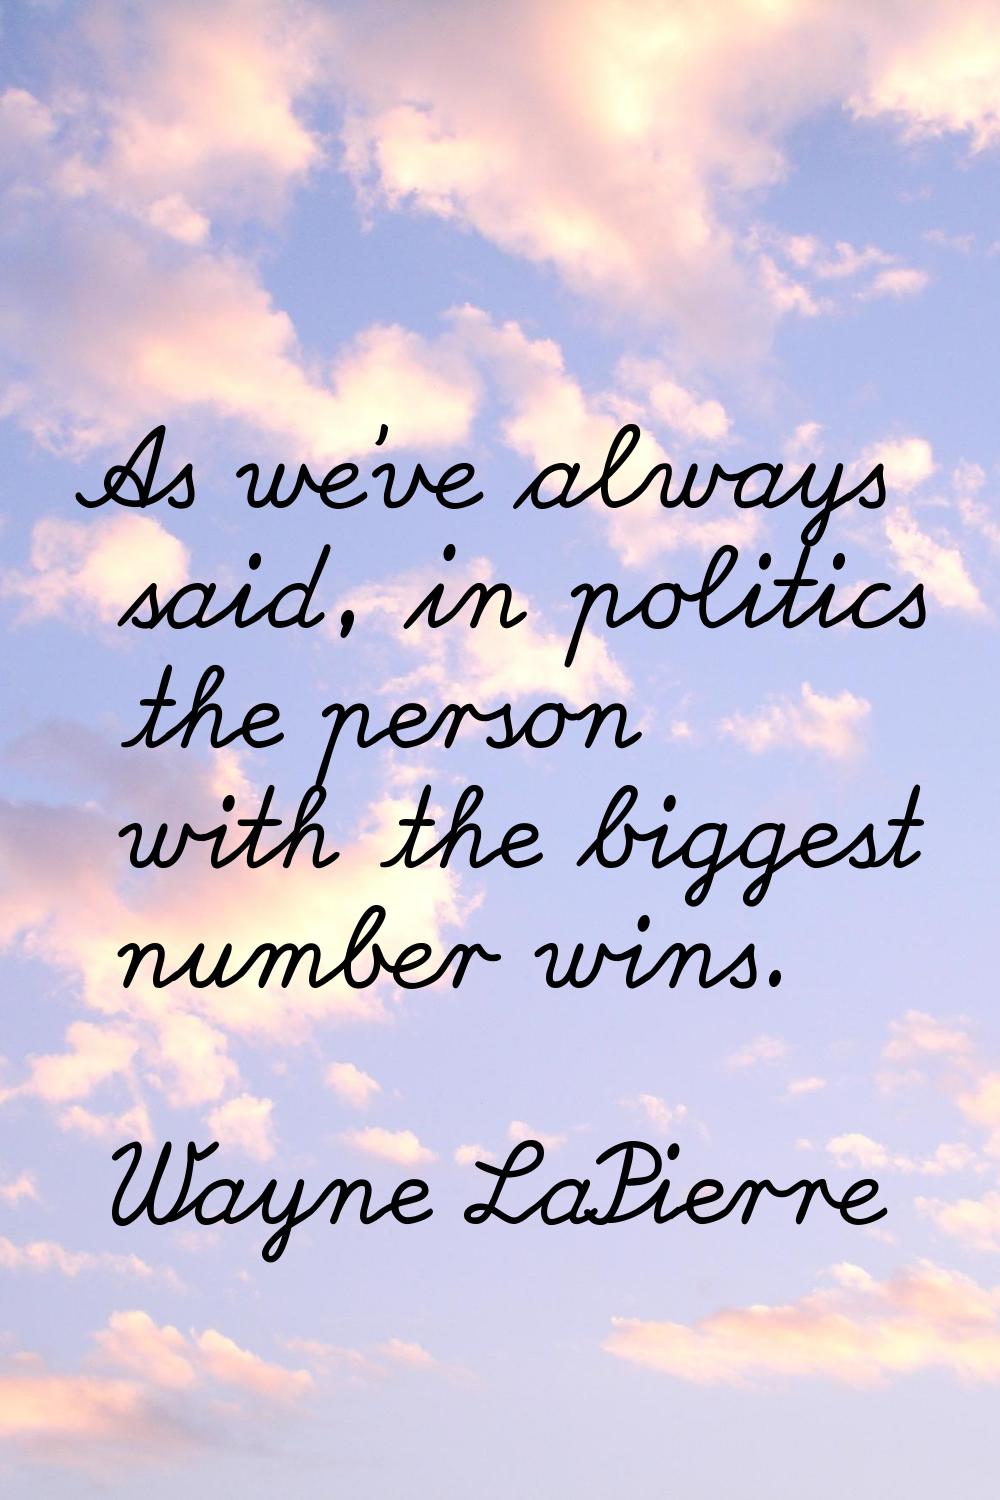 As we've always said, in politics the person with the biggest number wins.